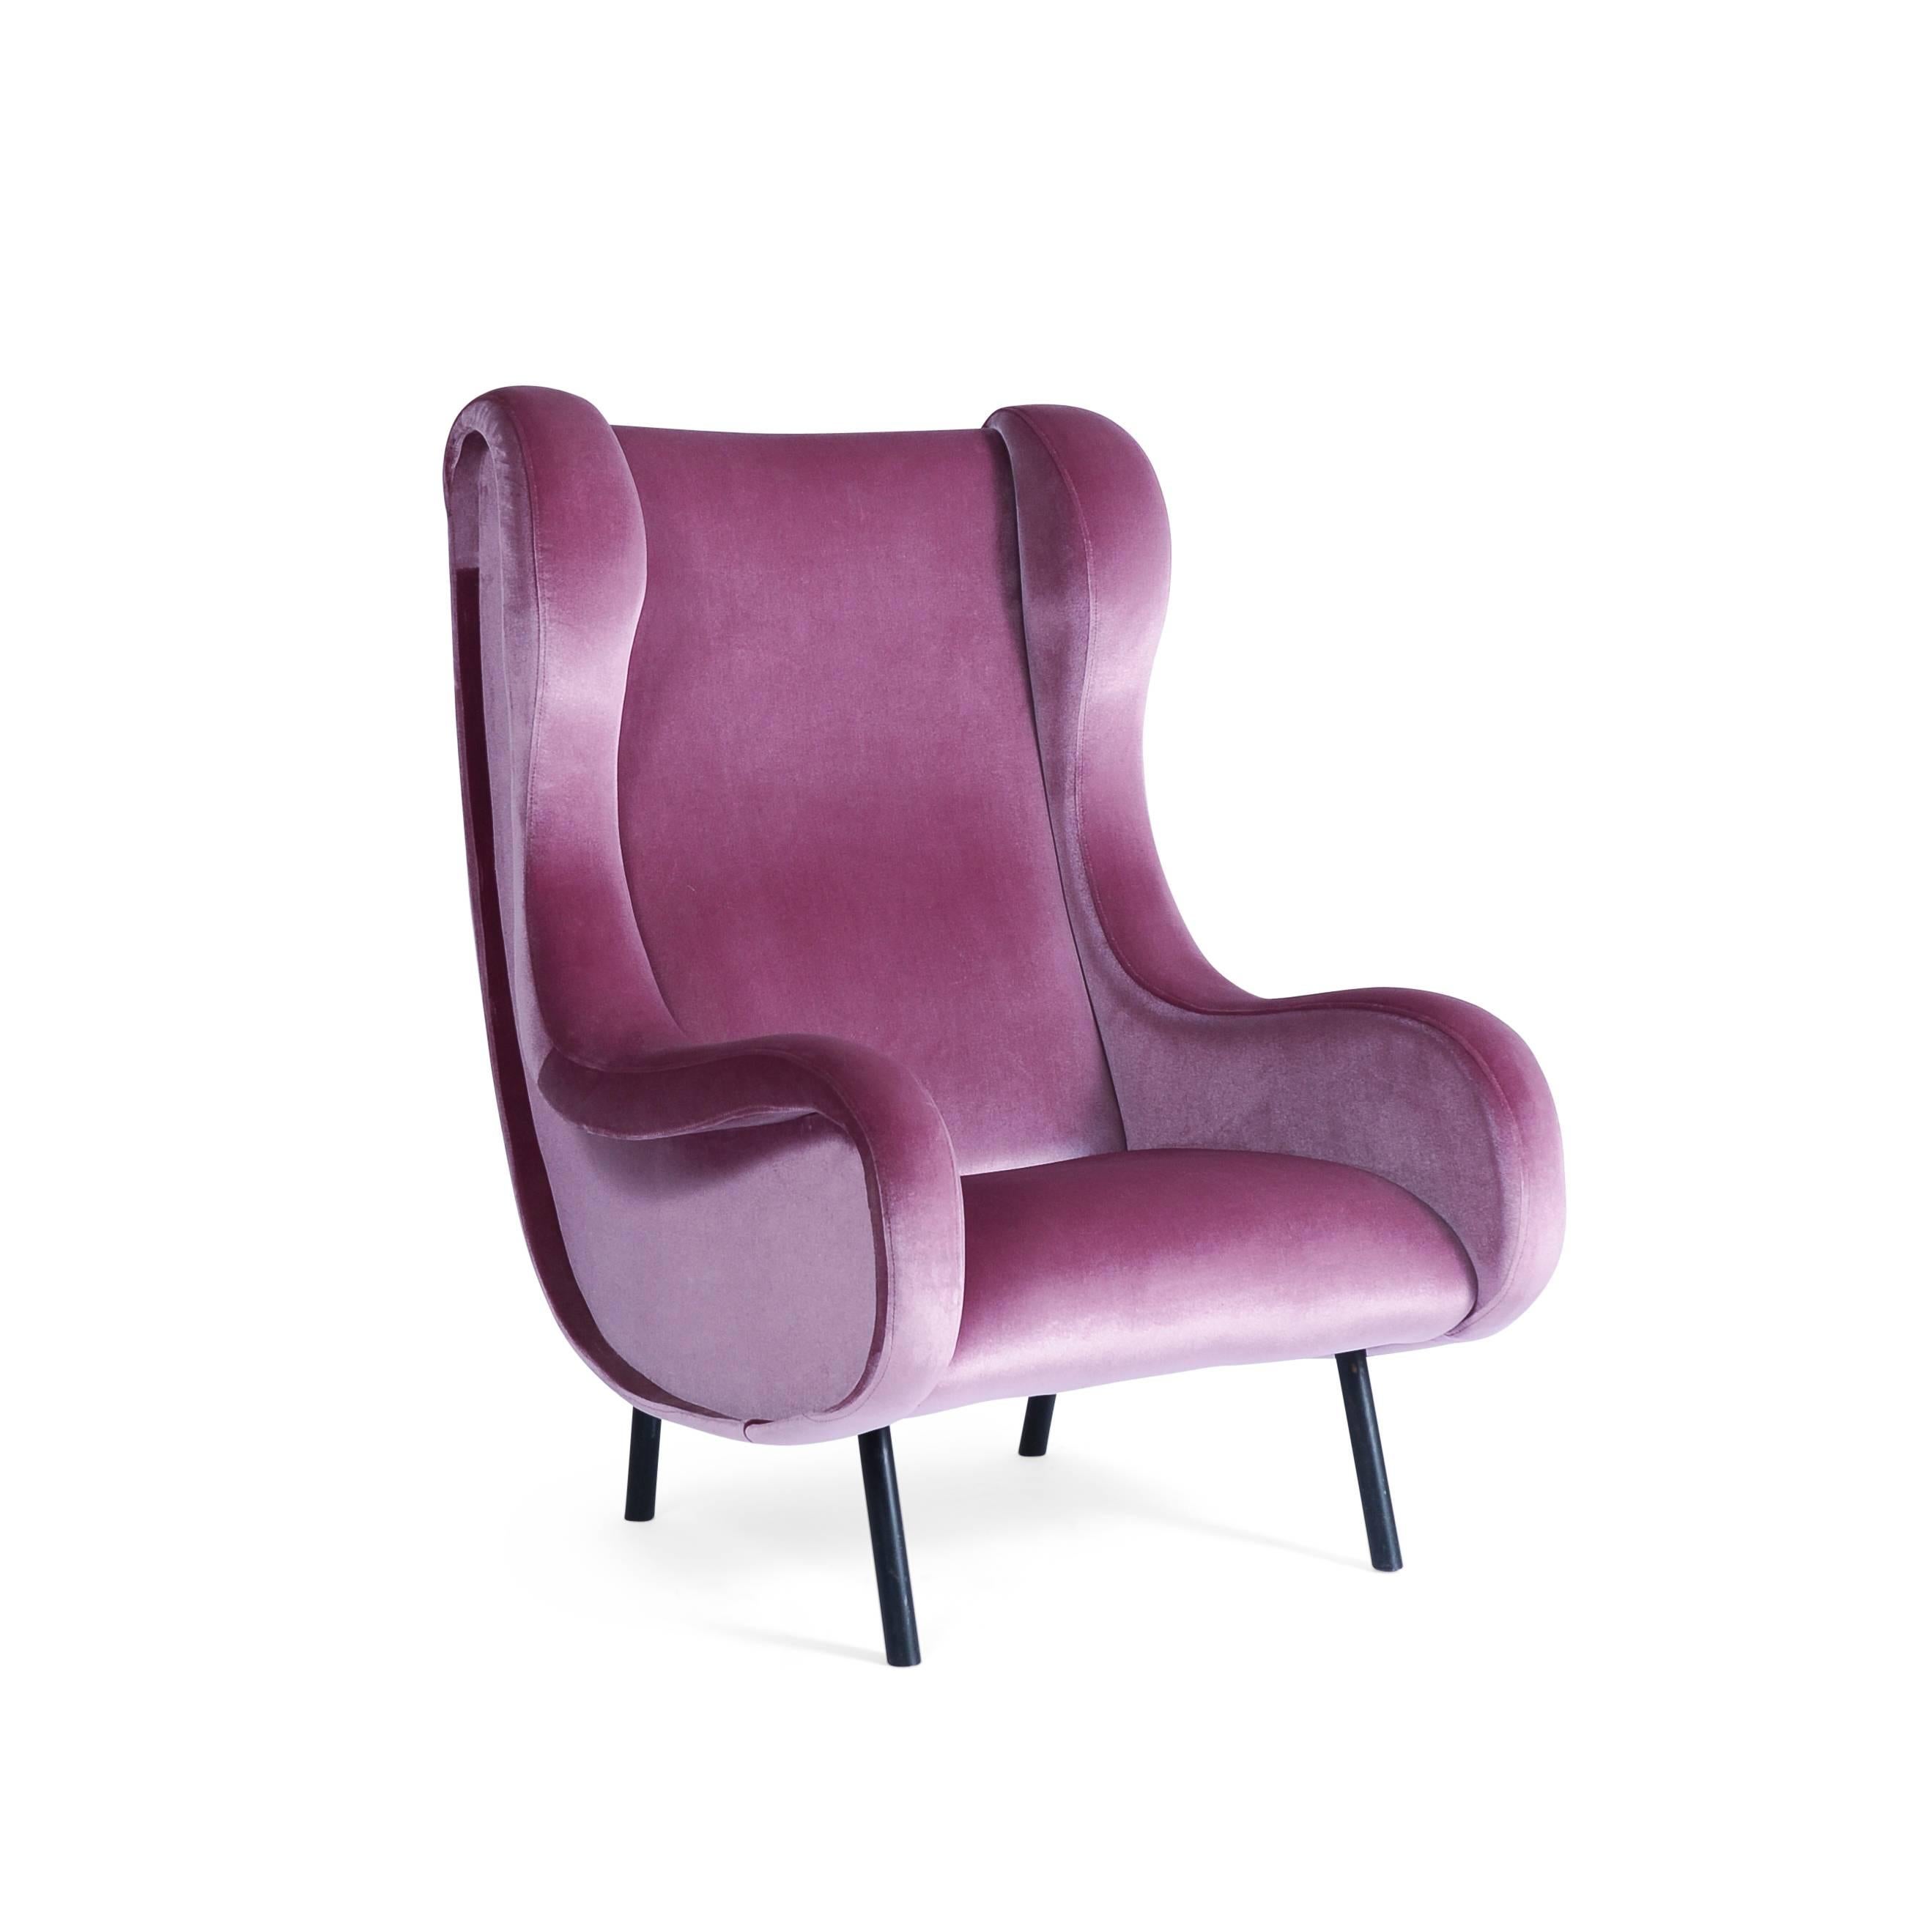 Pair of lounge chairs manufactured by Artflex upholstered in orchid velvet.